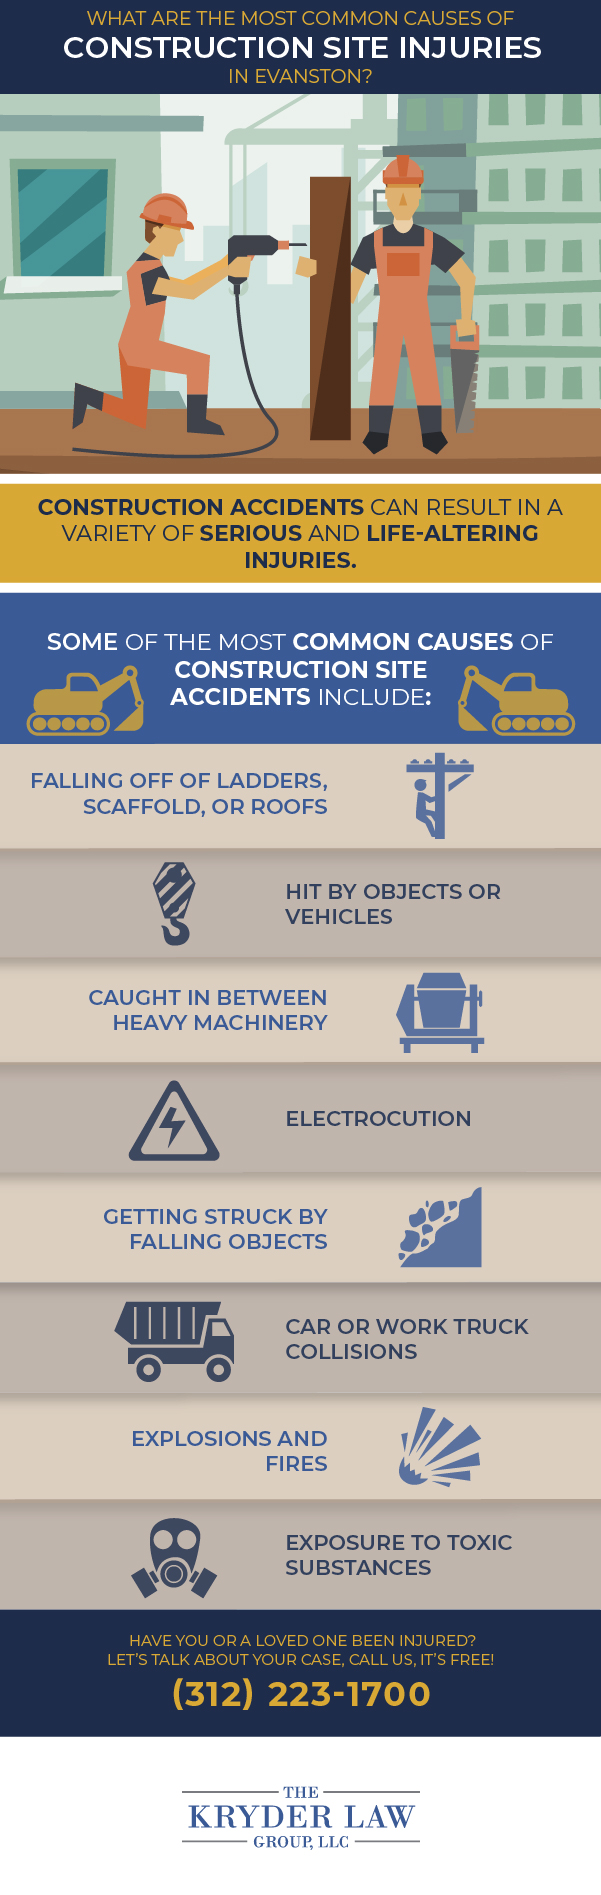 The Benefits of Hiring an Evanston Construction Accident Lawyer Infographic